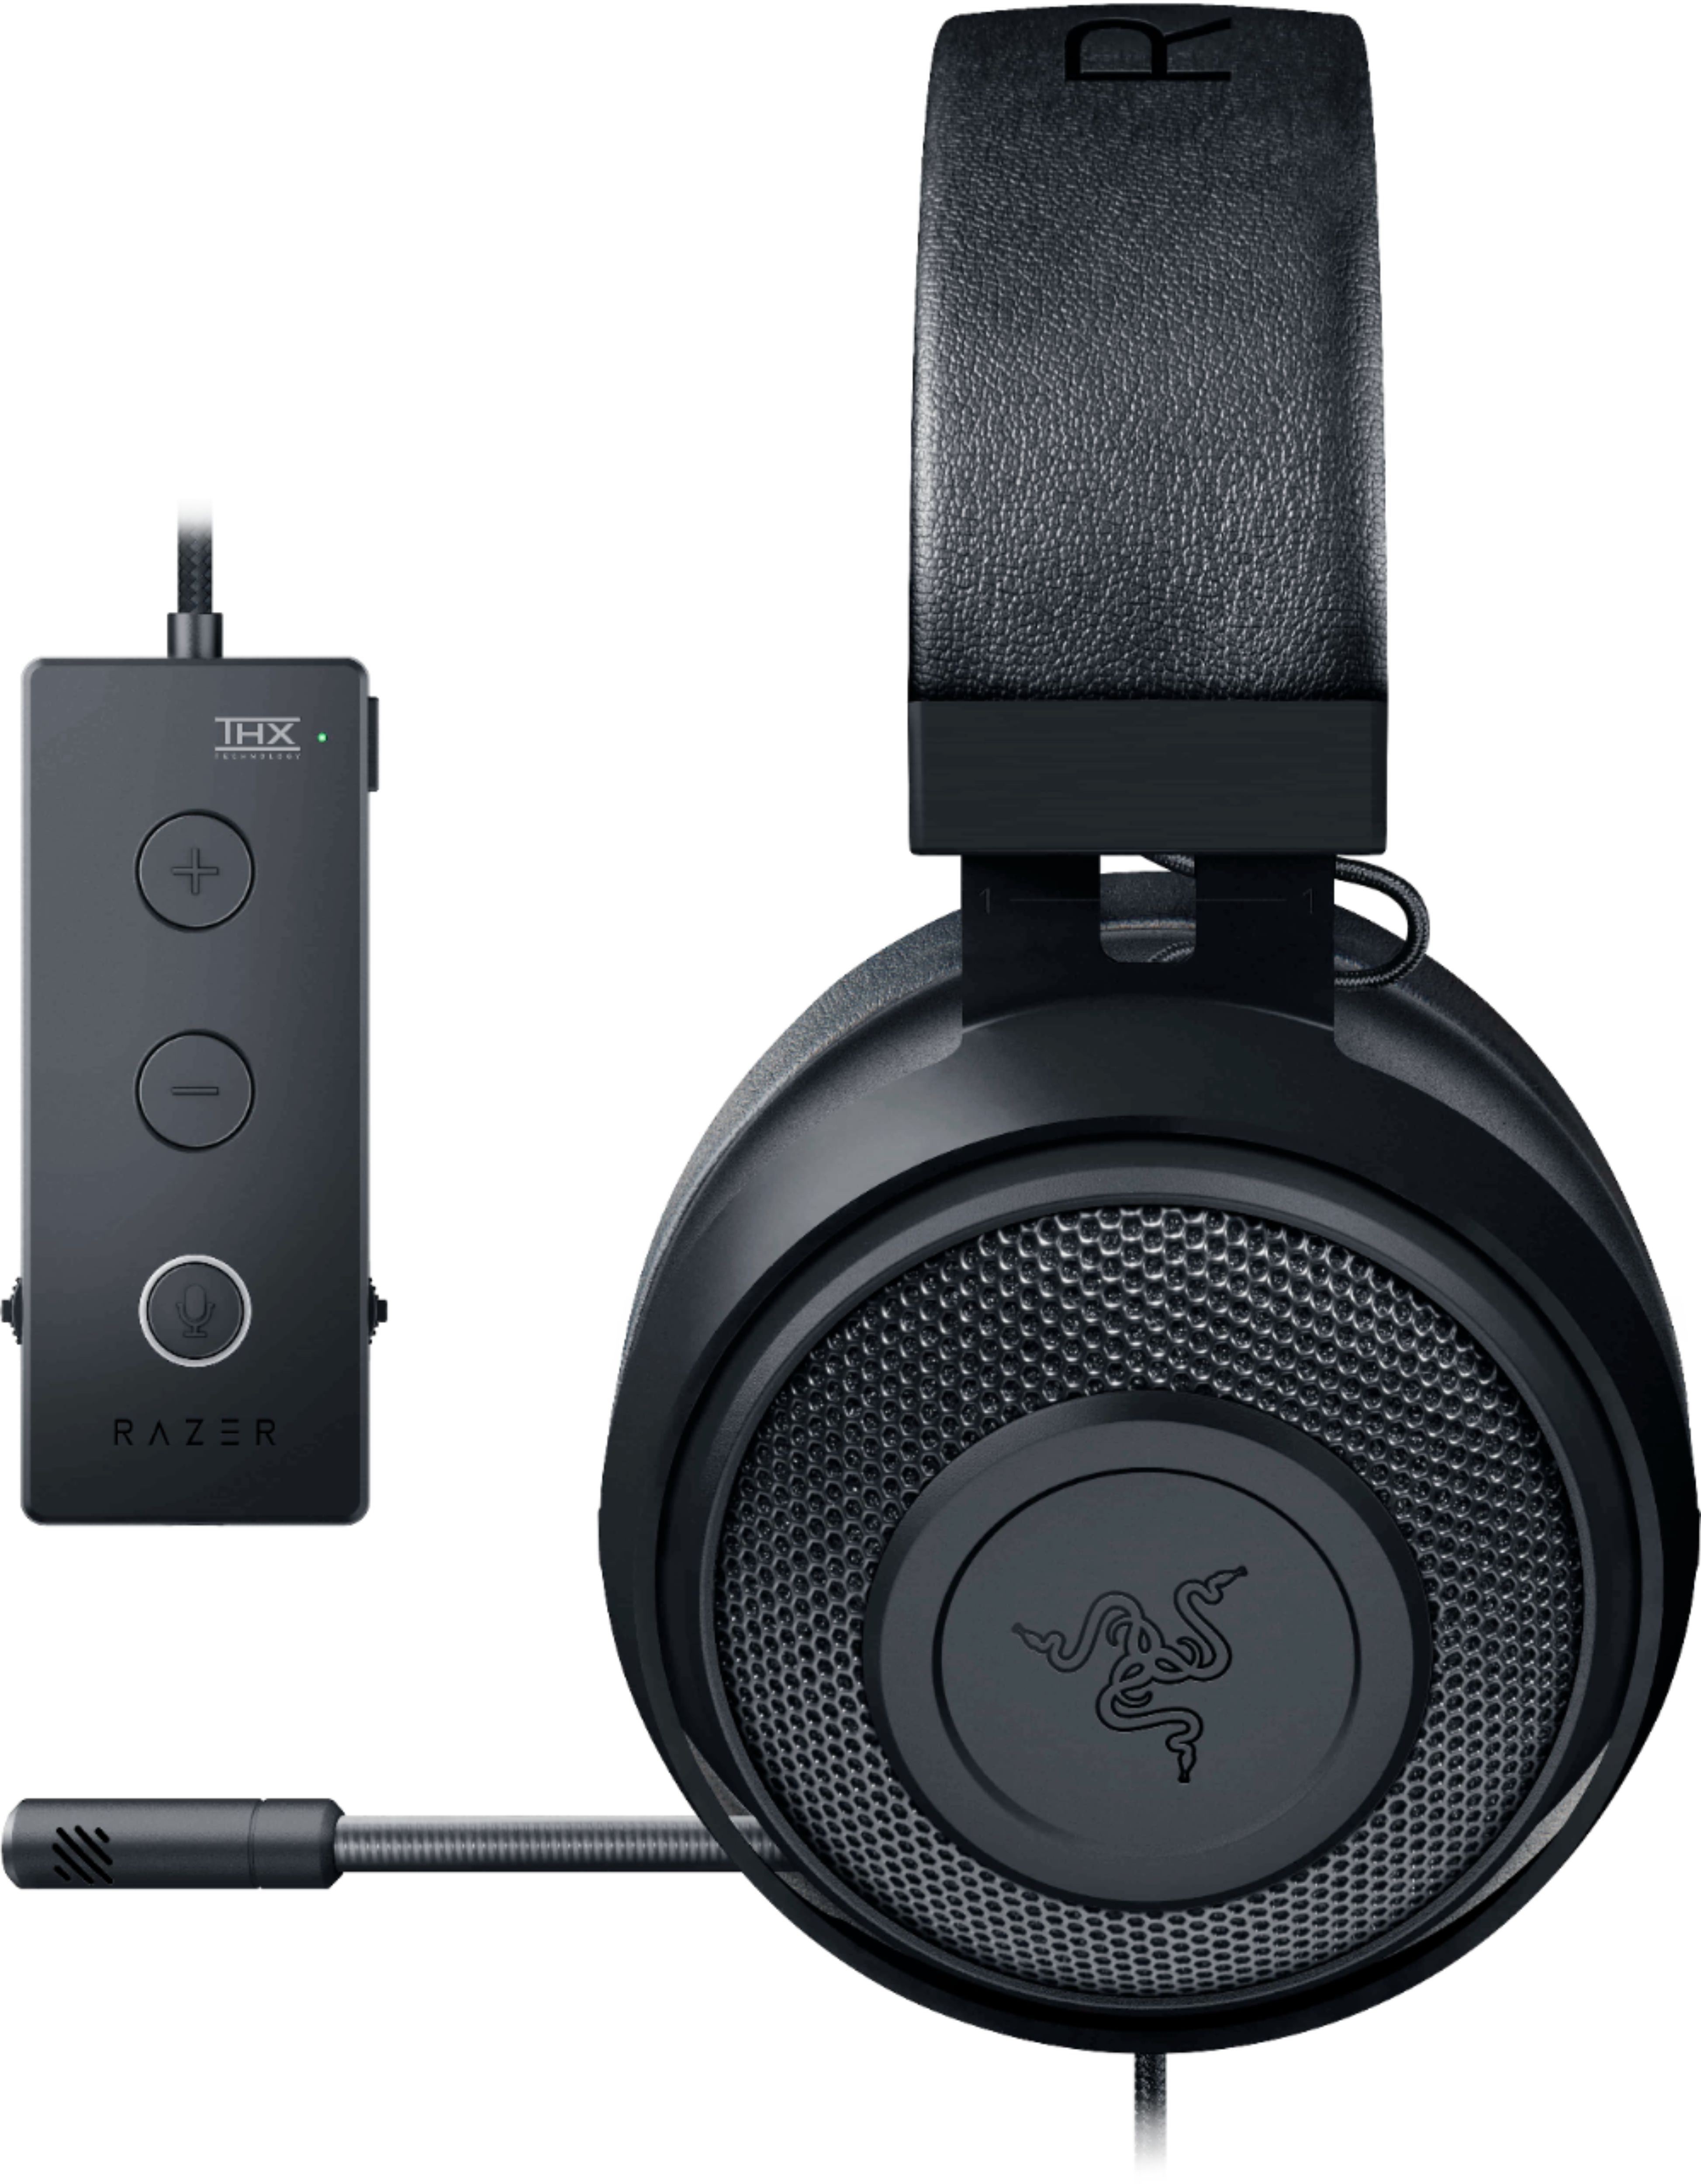 psychologie Thespian reguleren Best Buy: Razer Kraken Tournament Edition Wired Stereo Gaming Over-the-Ear  Headphones for PC, Mac, Xbox One, Switch, PS4, Mobile Devices Black  RZ04-02051000-R3U1